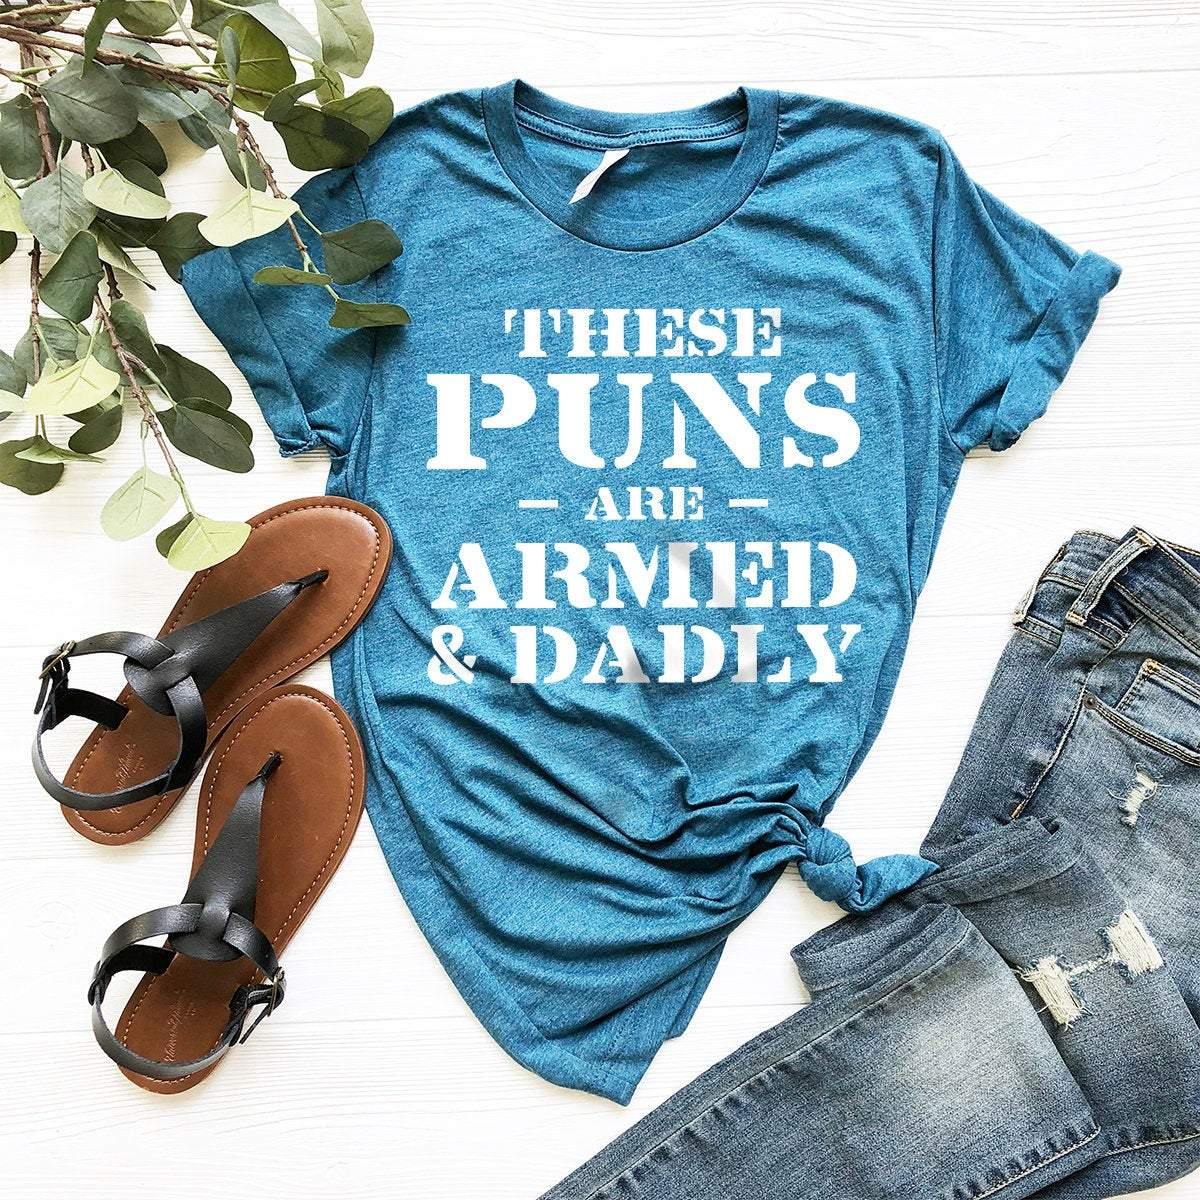 Funny Dad Shirt, Dad Shirt, Dad Birthday Gift, These Puns Are Armed And Dadly Shirt, Dad Humor Shirt, Dad Gift, Daddy Shirt, Dad Tee - Fastdeliverytees.com